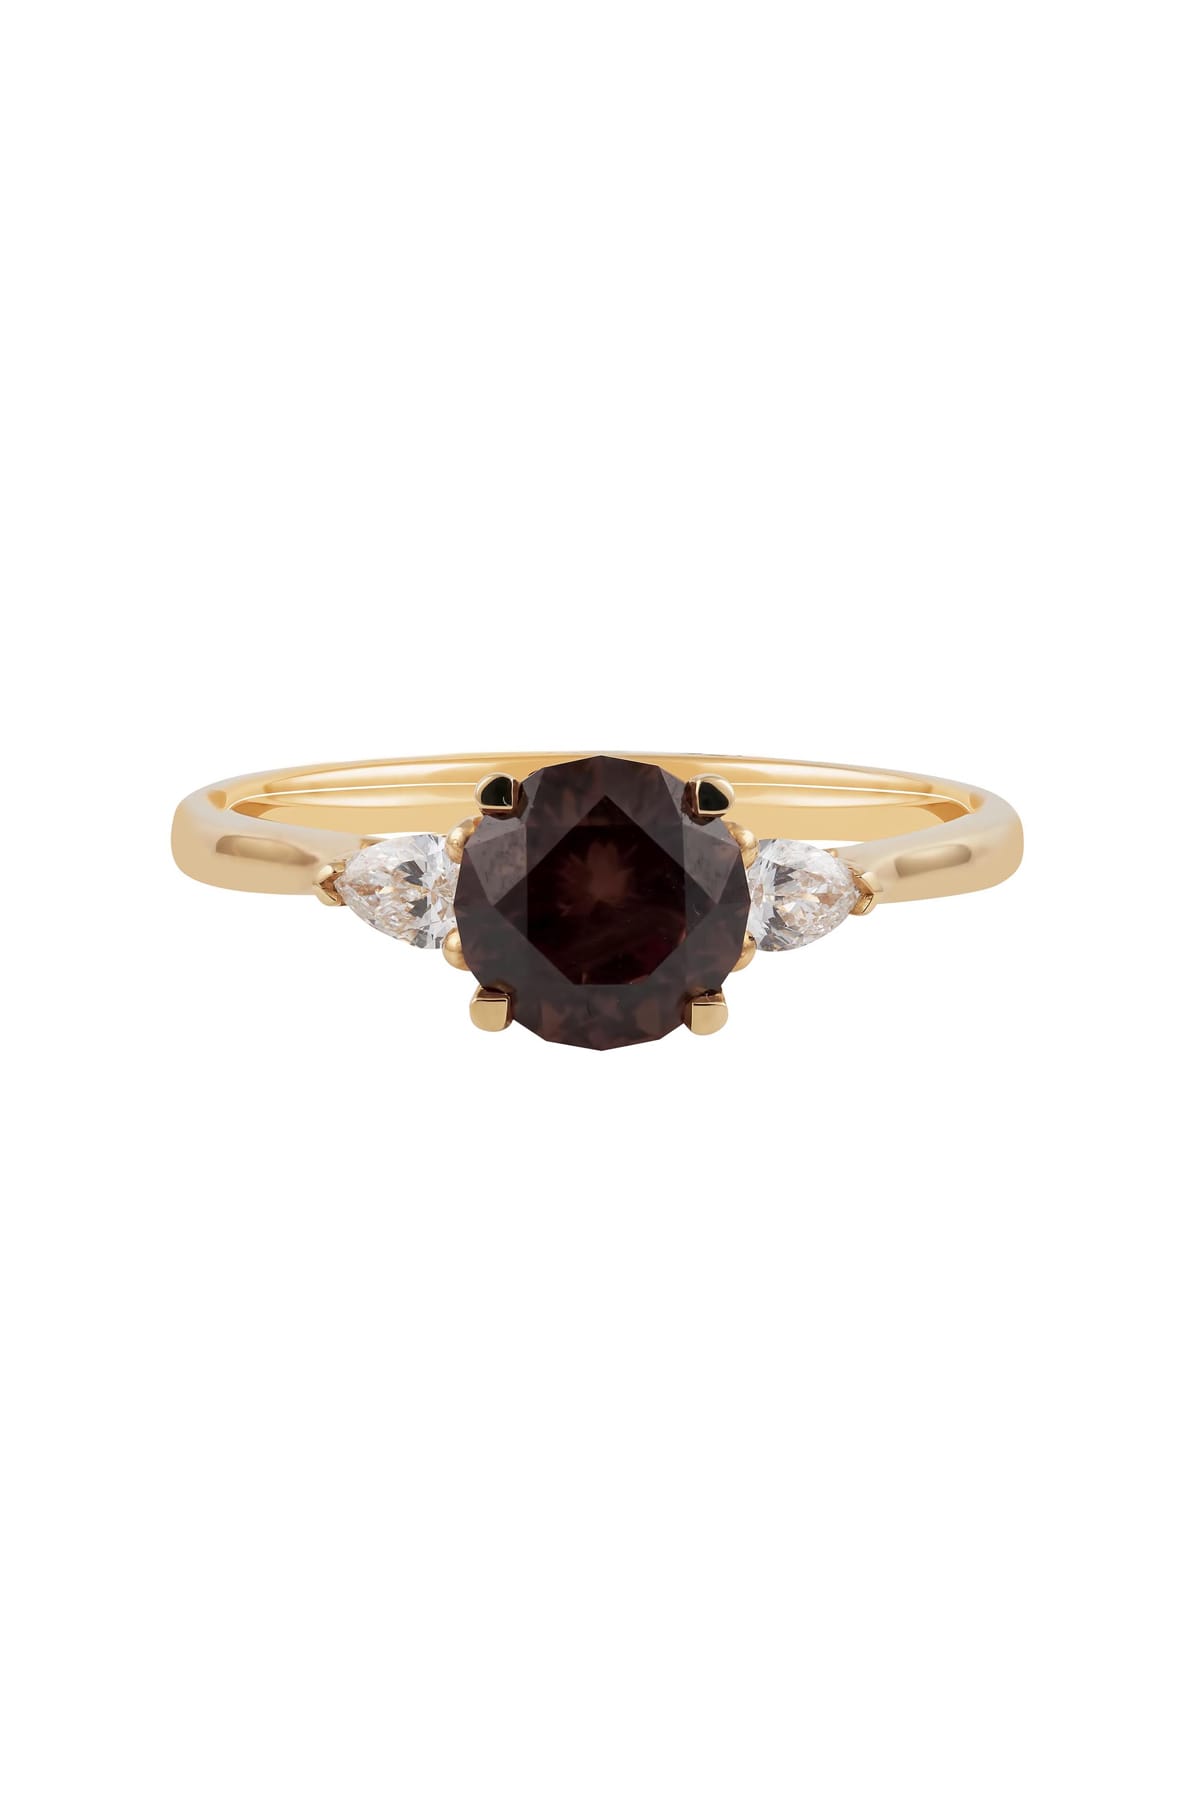 1.30ct Round Colour Changing Garnet and Diamond Ring set in 18ct Yellow Gold available at LeGassick Diamonds and Jewellery Gold Coast, Australia.